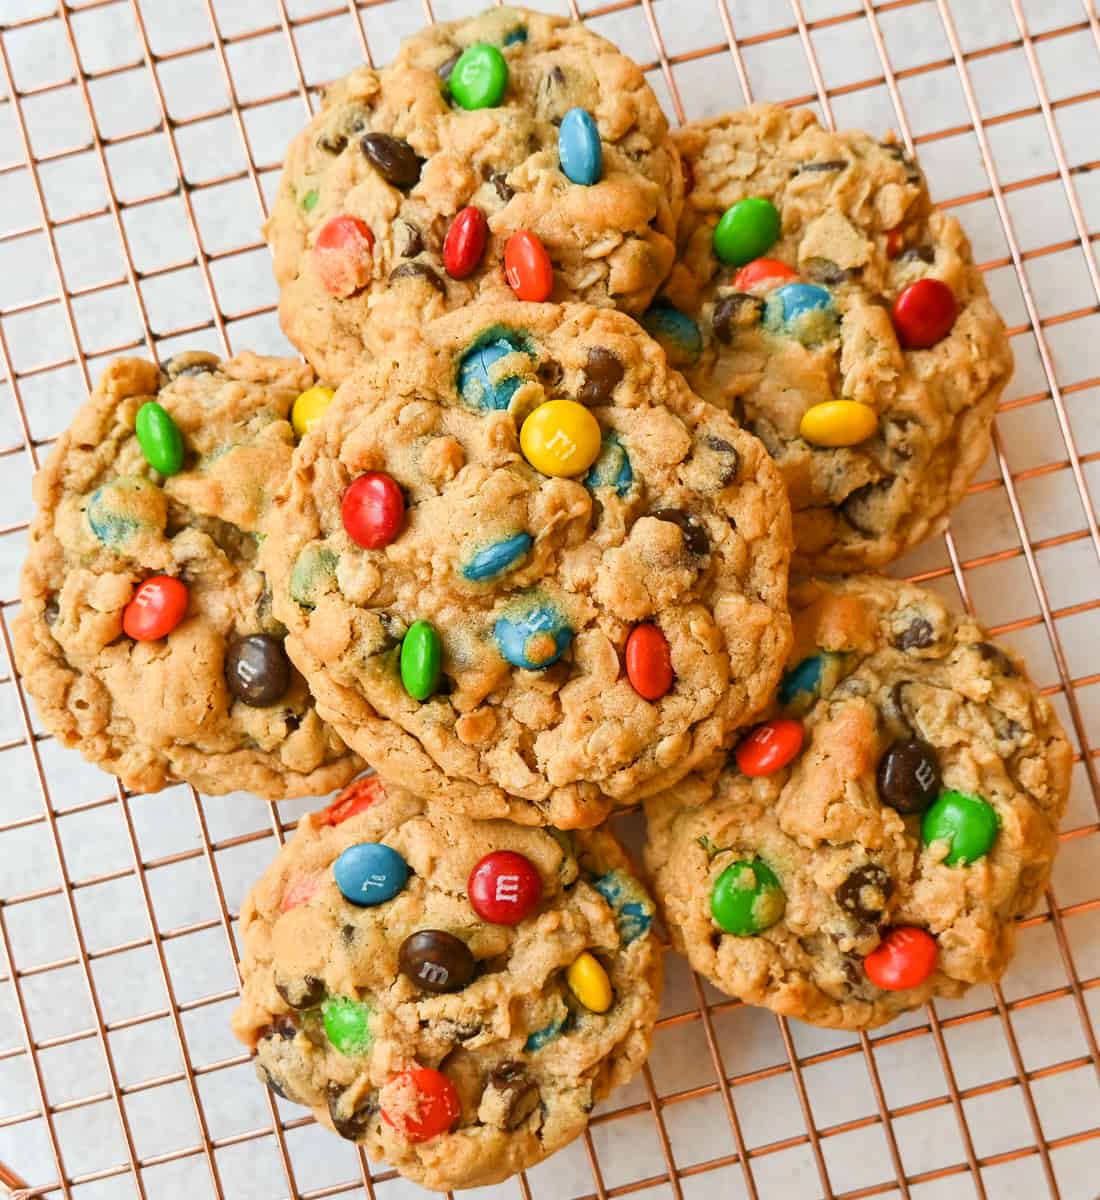 Best Monster Cookies. The Best Peanut Butter Monster Cookies are made with creamy peanut butter, hearty oats, chocolate chips, and M&M's. These soft and chewy Monster cookies are loved by everyone...especially peanut butter enthusiasts!